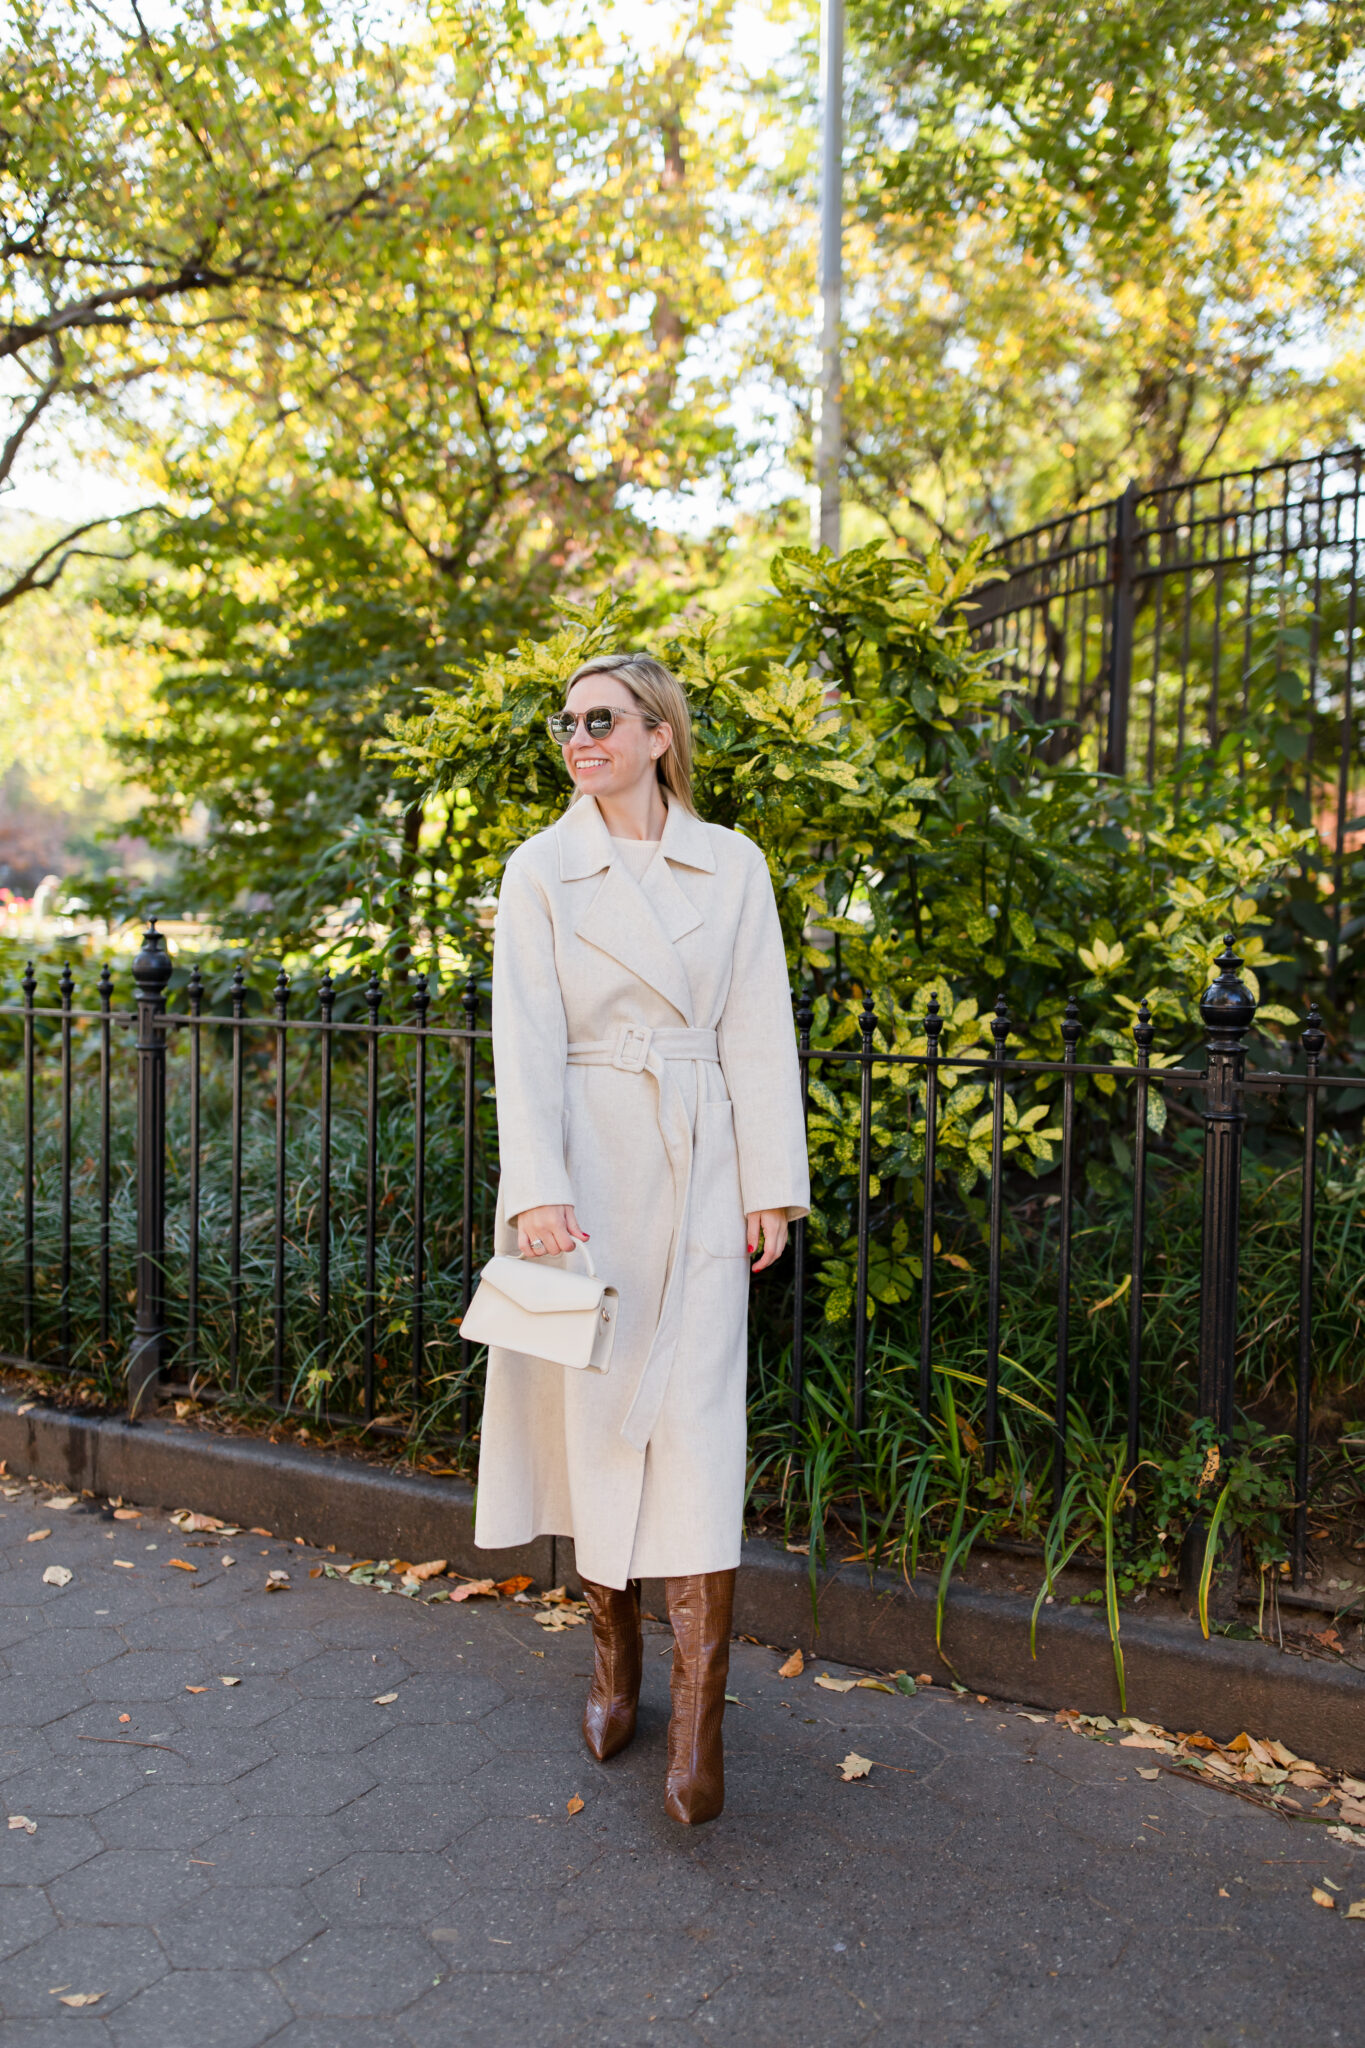 Wool Coats For The Winter - Blush & Blooms